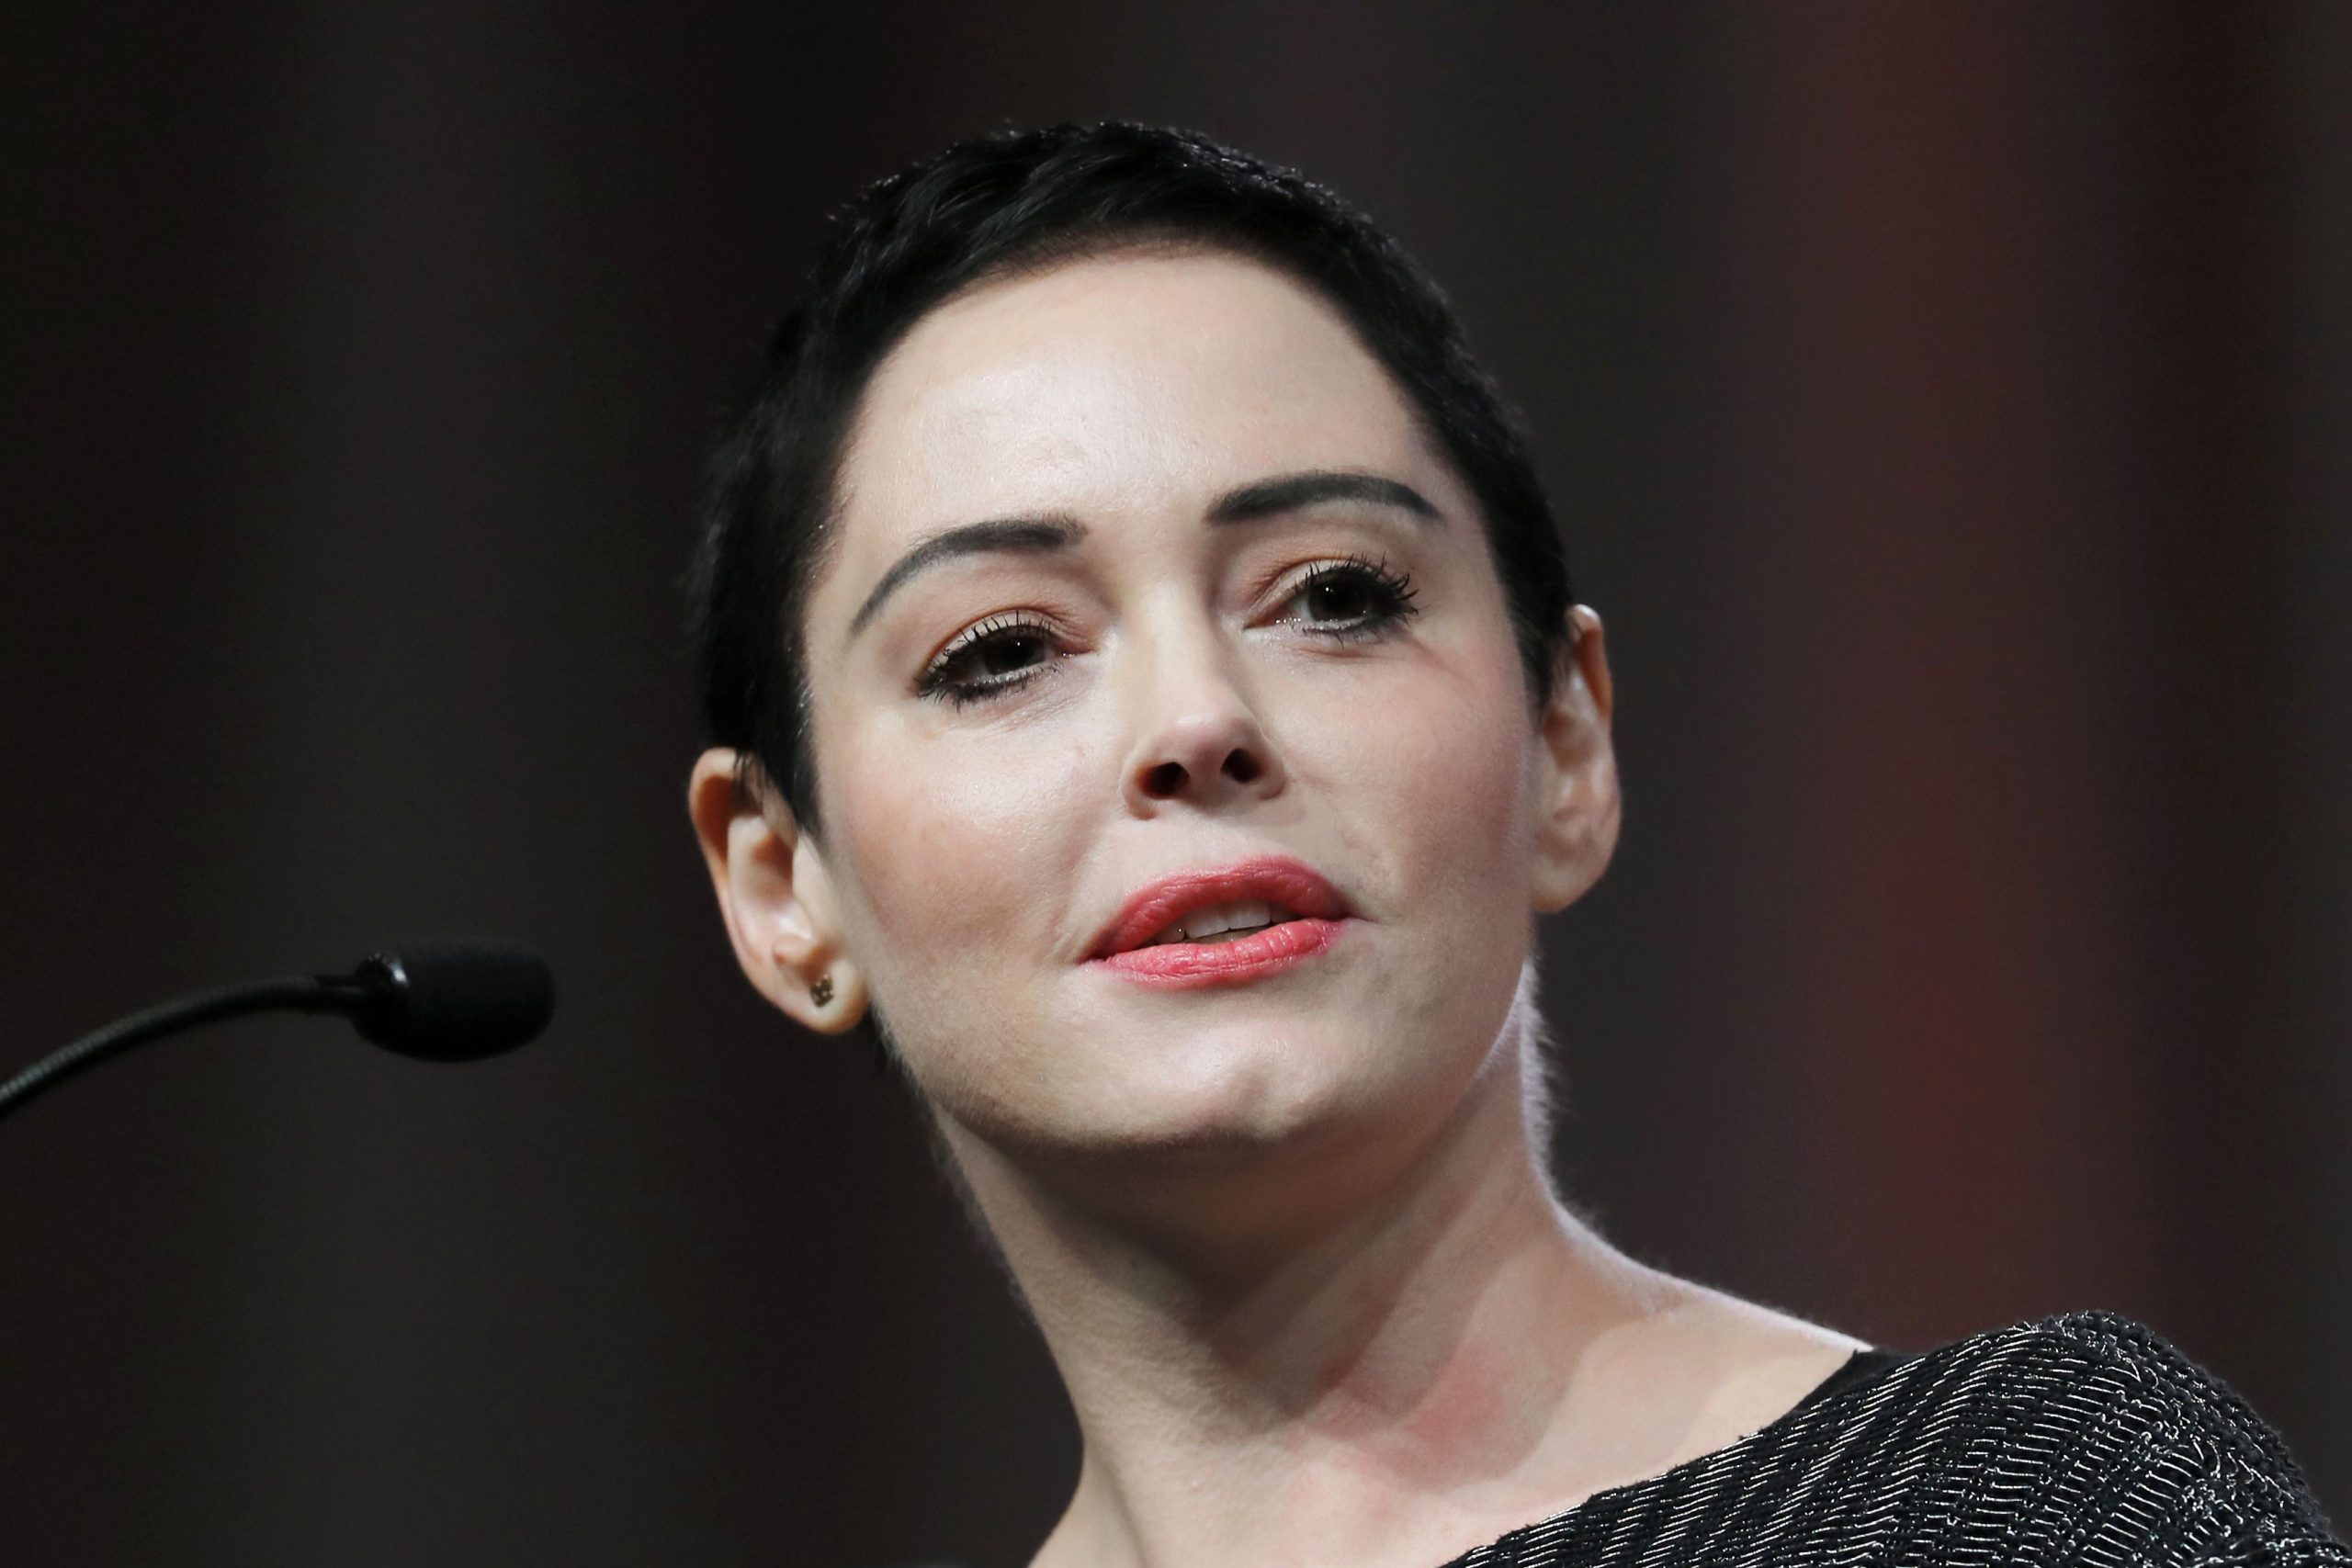 Rose Mcgowan Net Worth: How Much Does the Actress Earn?